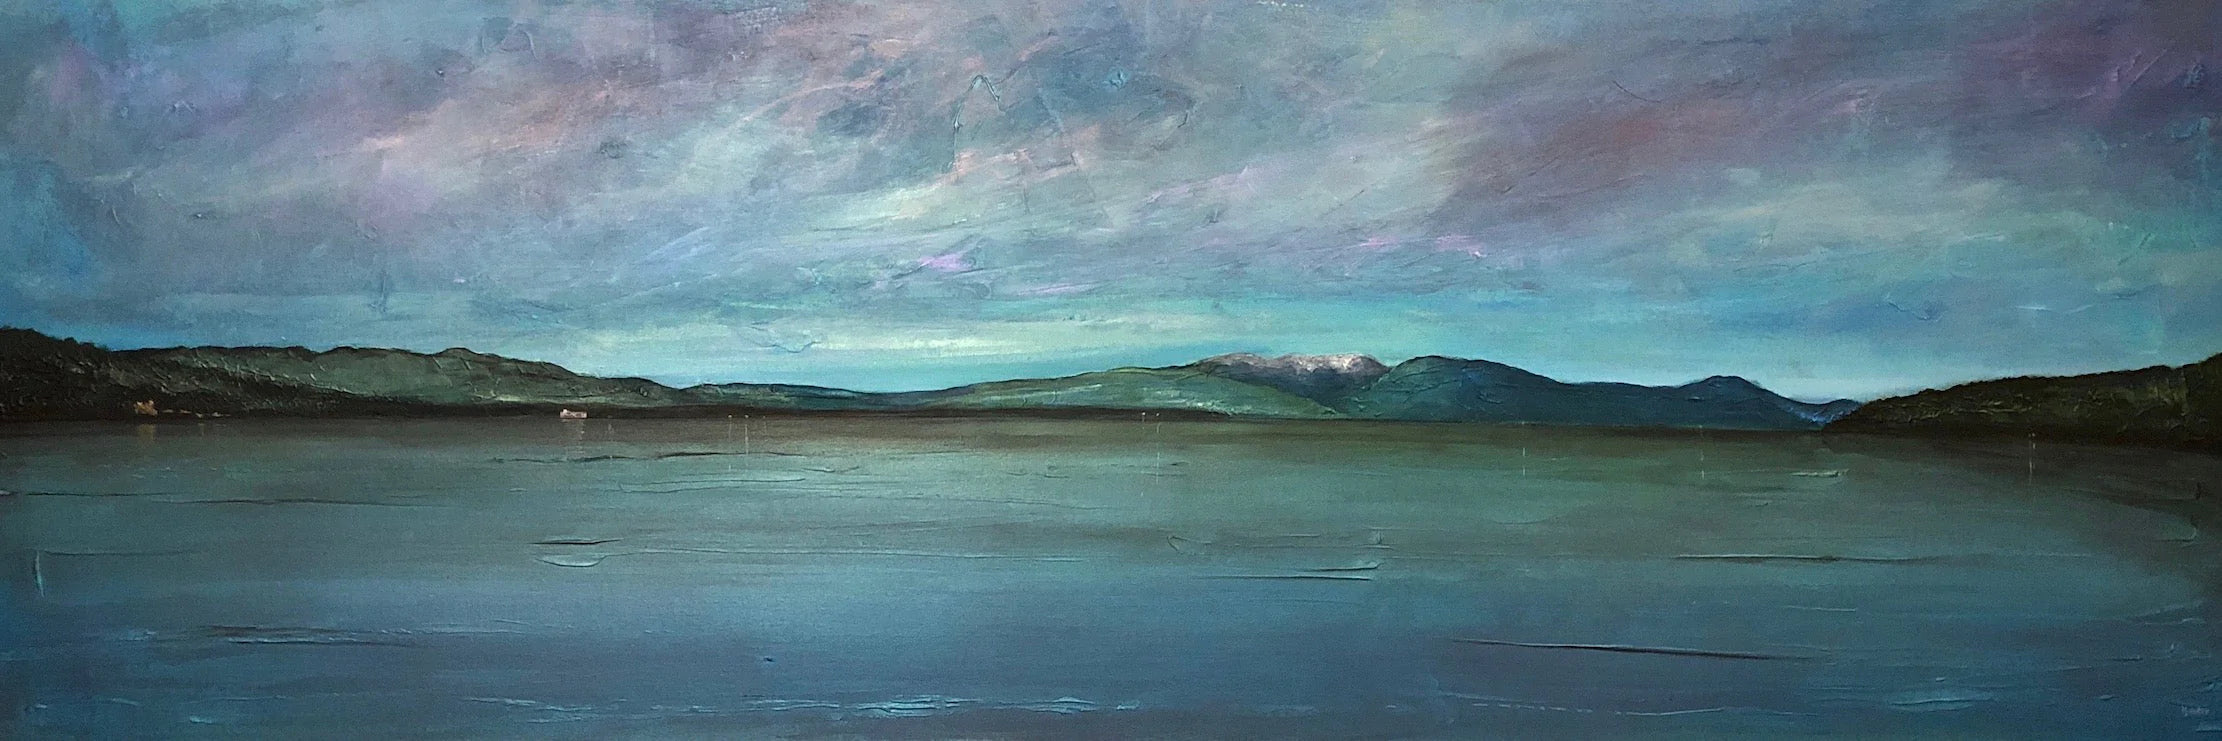 Loch Lomond From Balloch Castle Country Park Scotland Original Panoramic Landscape Painting